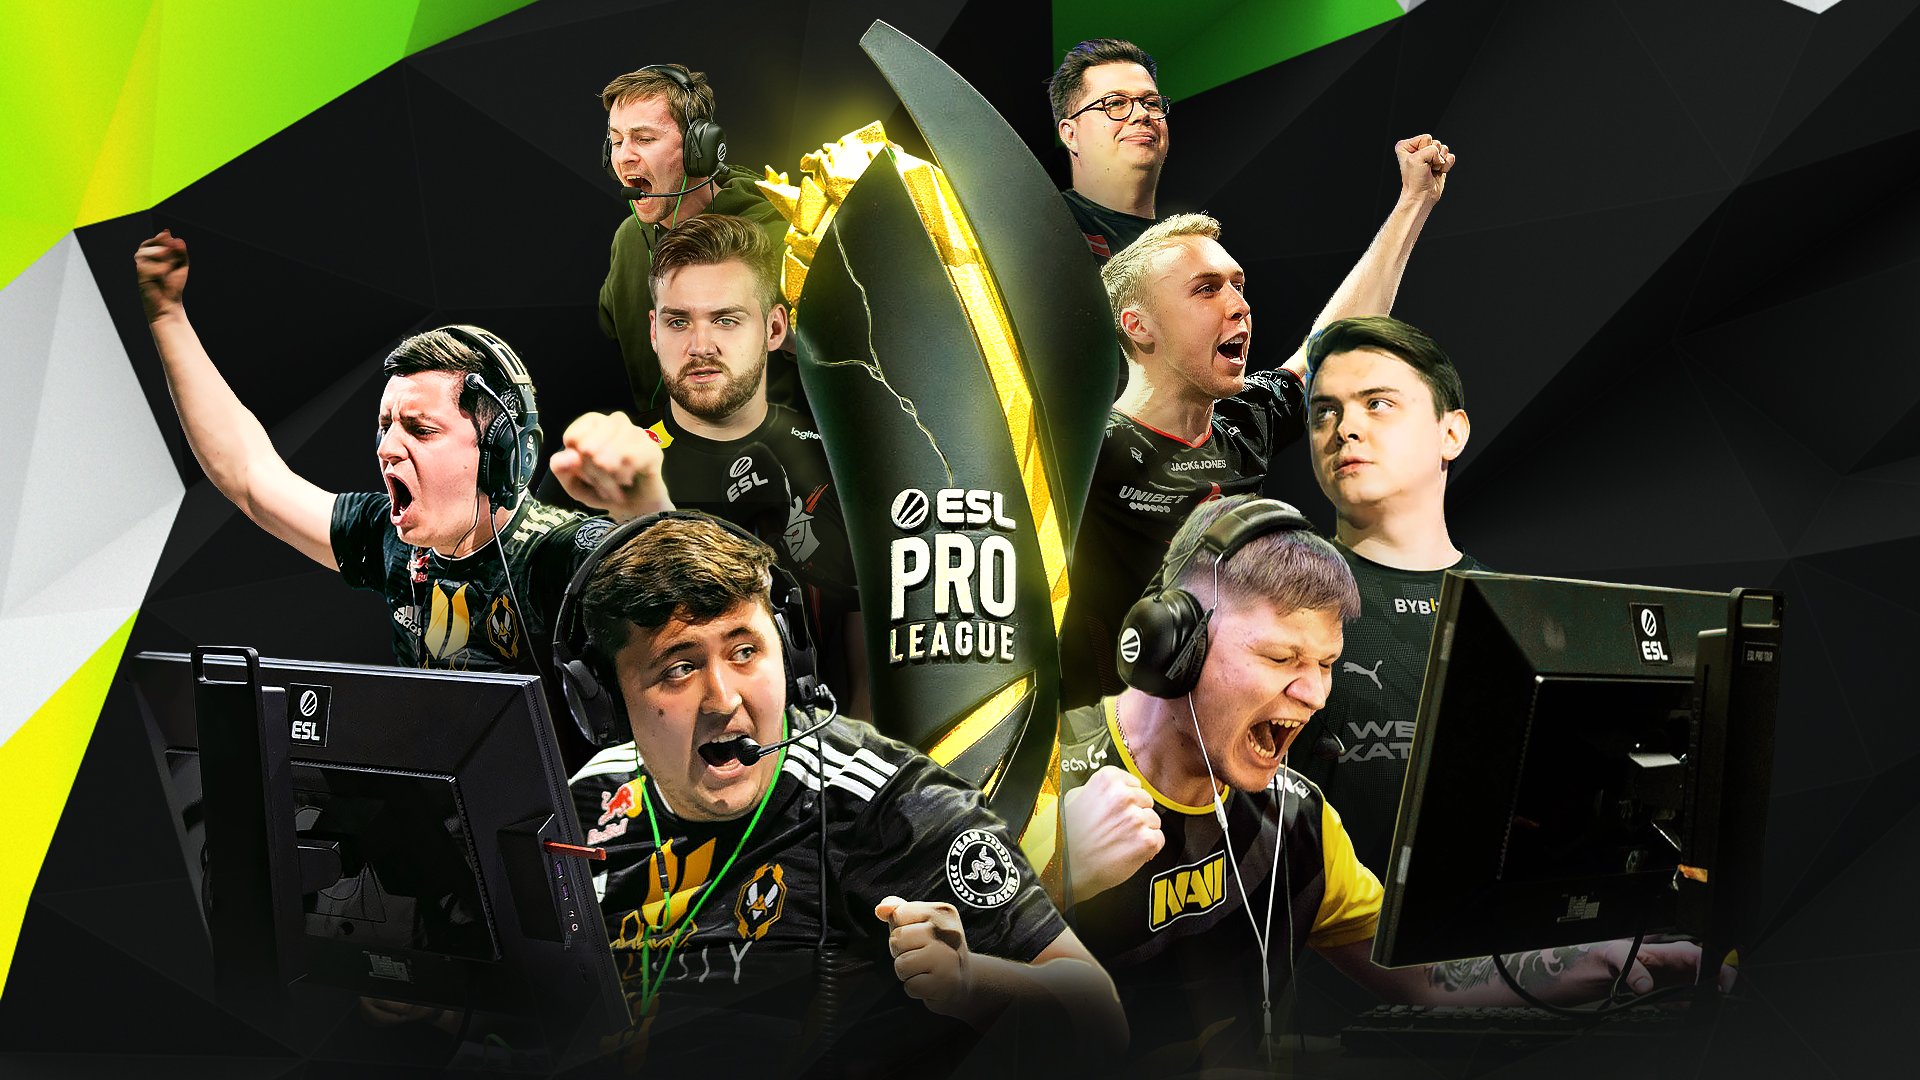 Players from different popular CS:GO teams together in a ESL Pro League poster